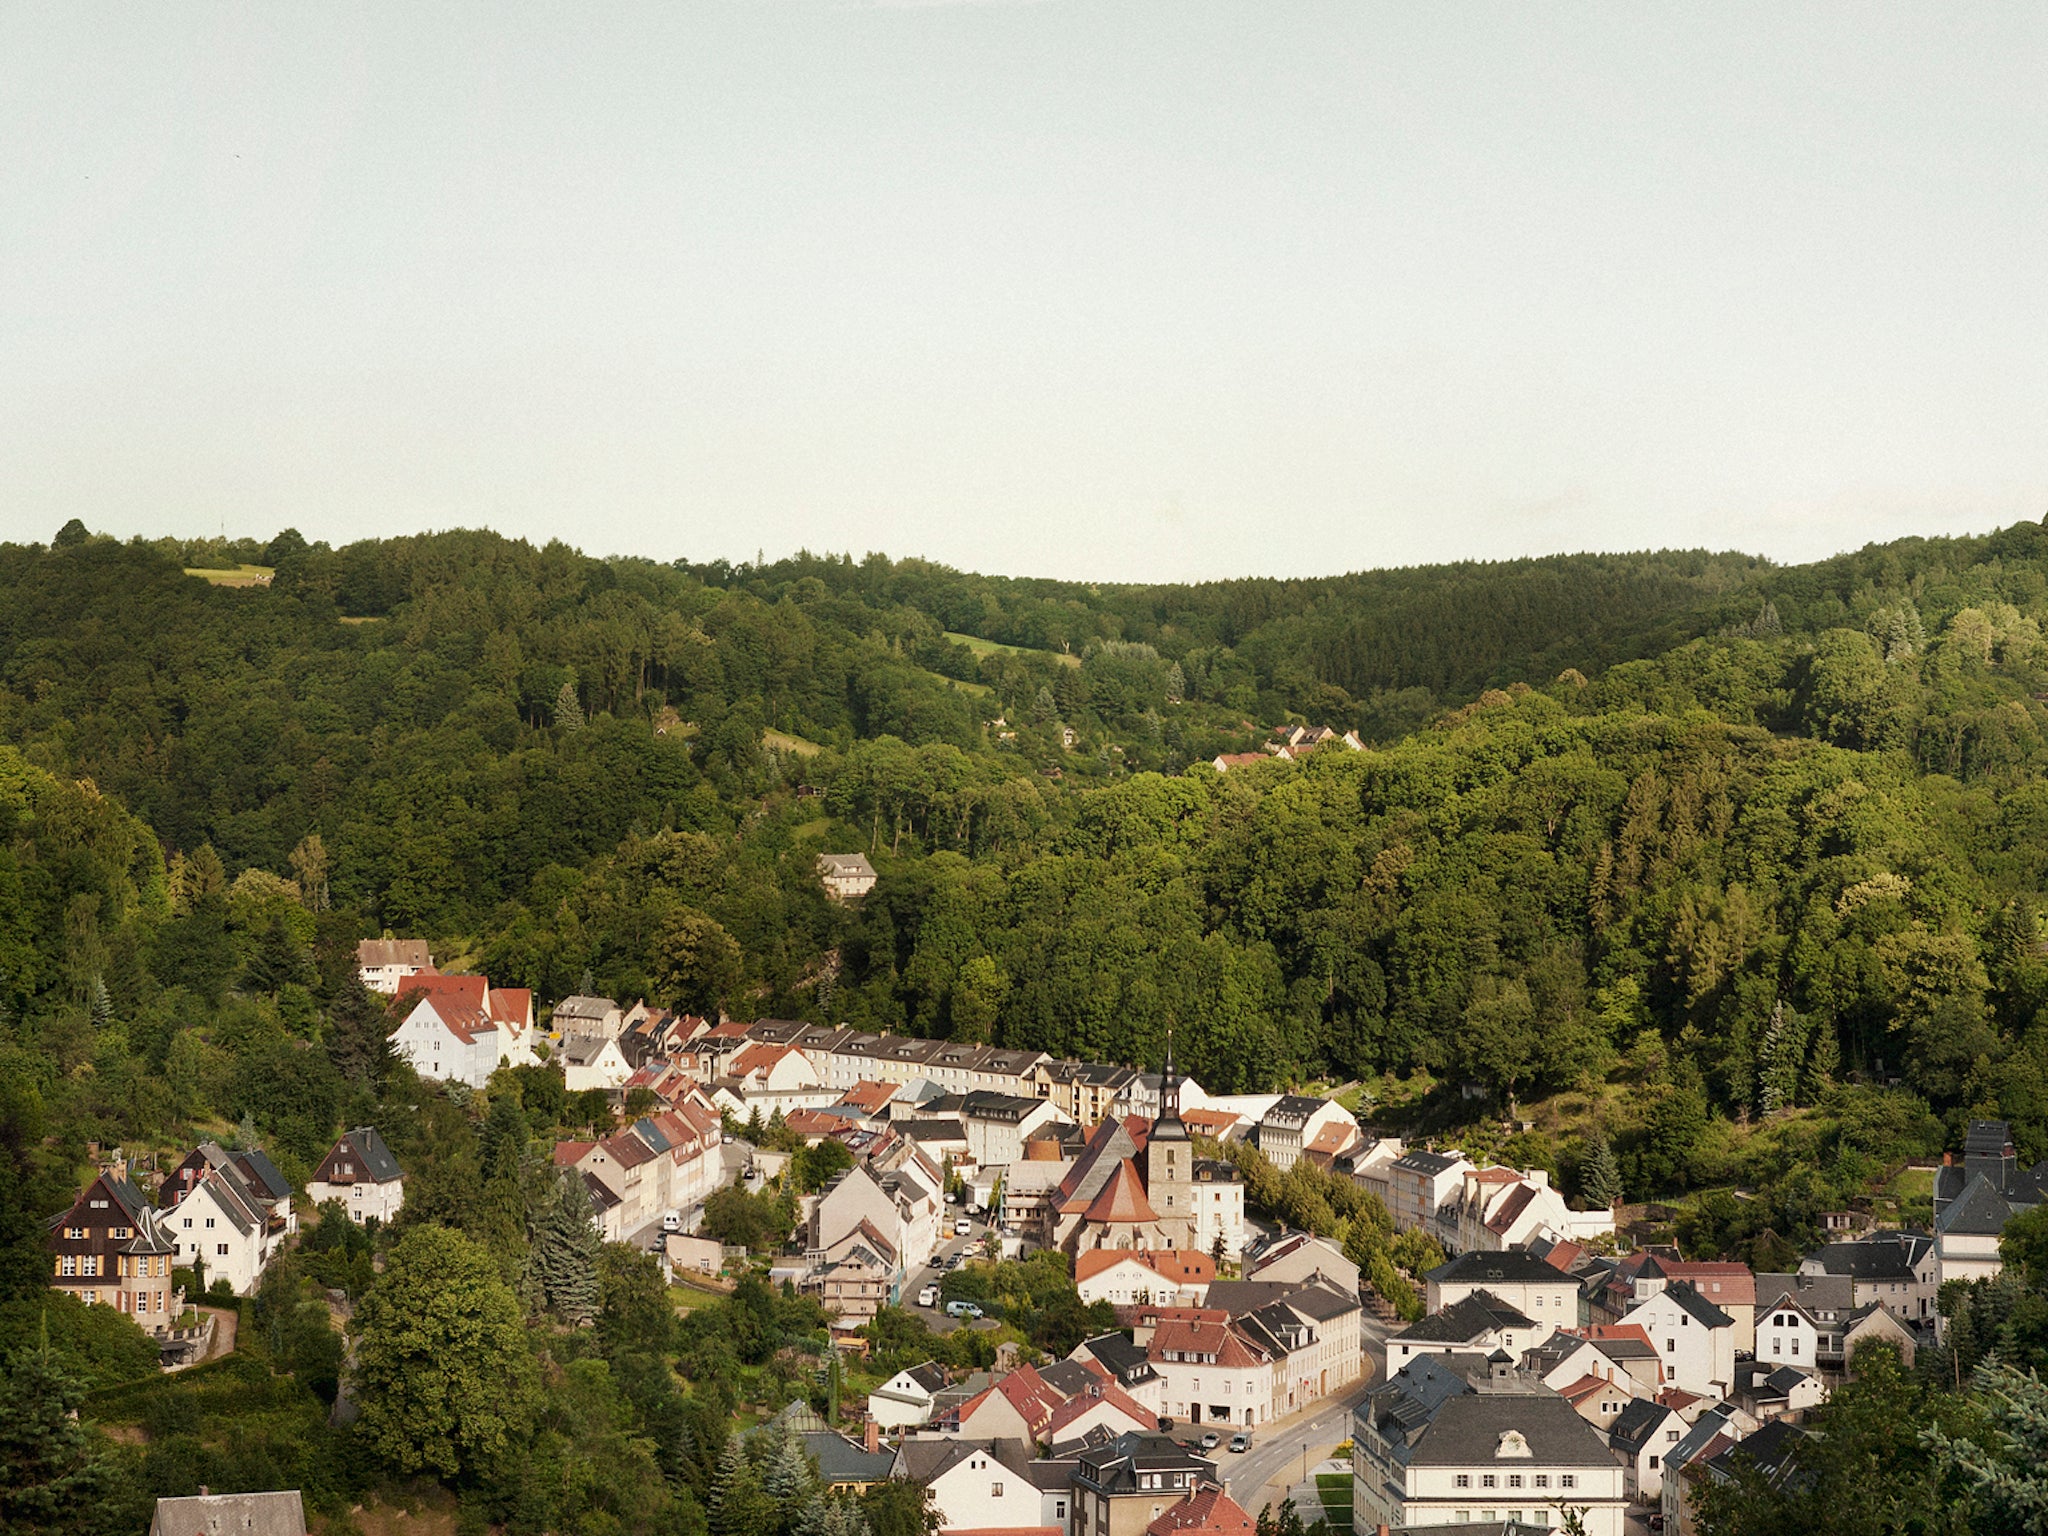 Glashütte in East Germany is known as mini-Switzerland for its thriving watchmaking industry